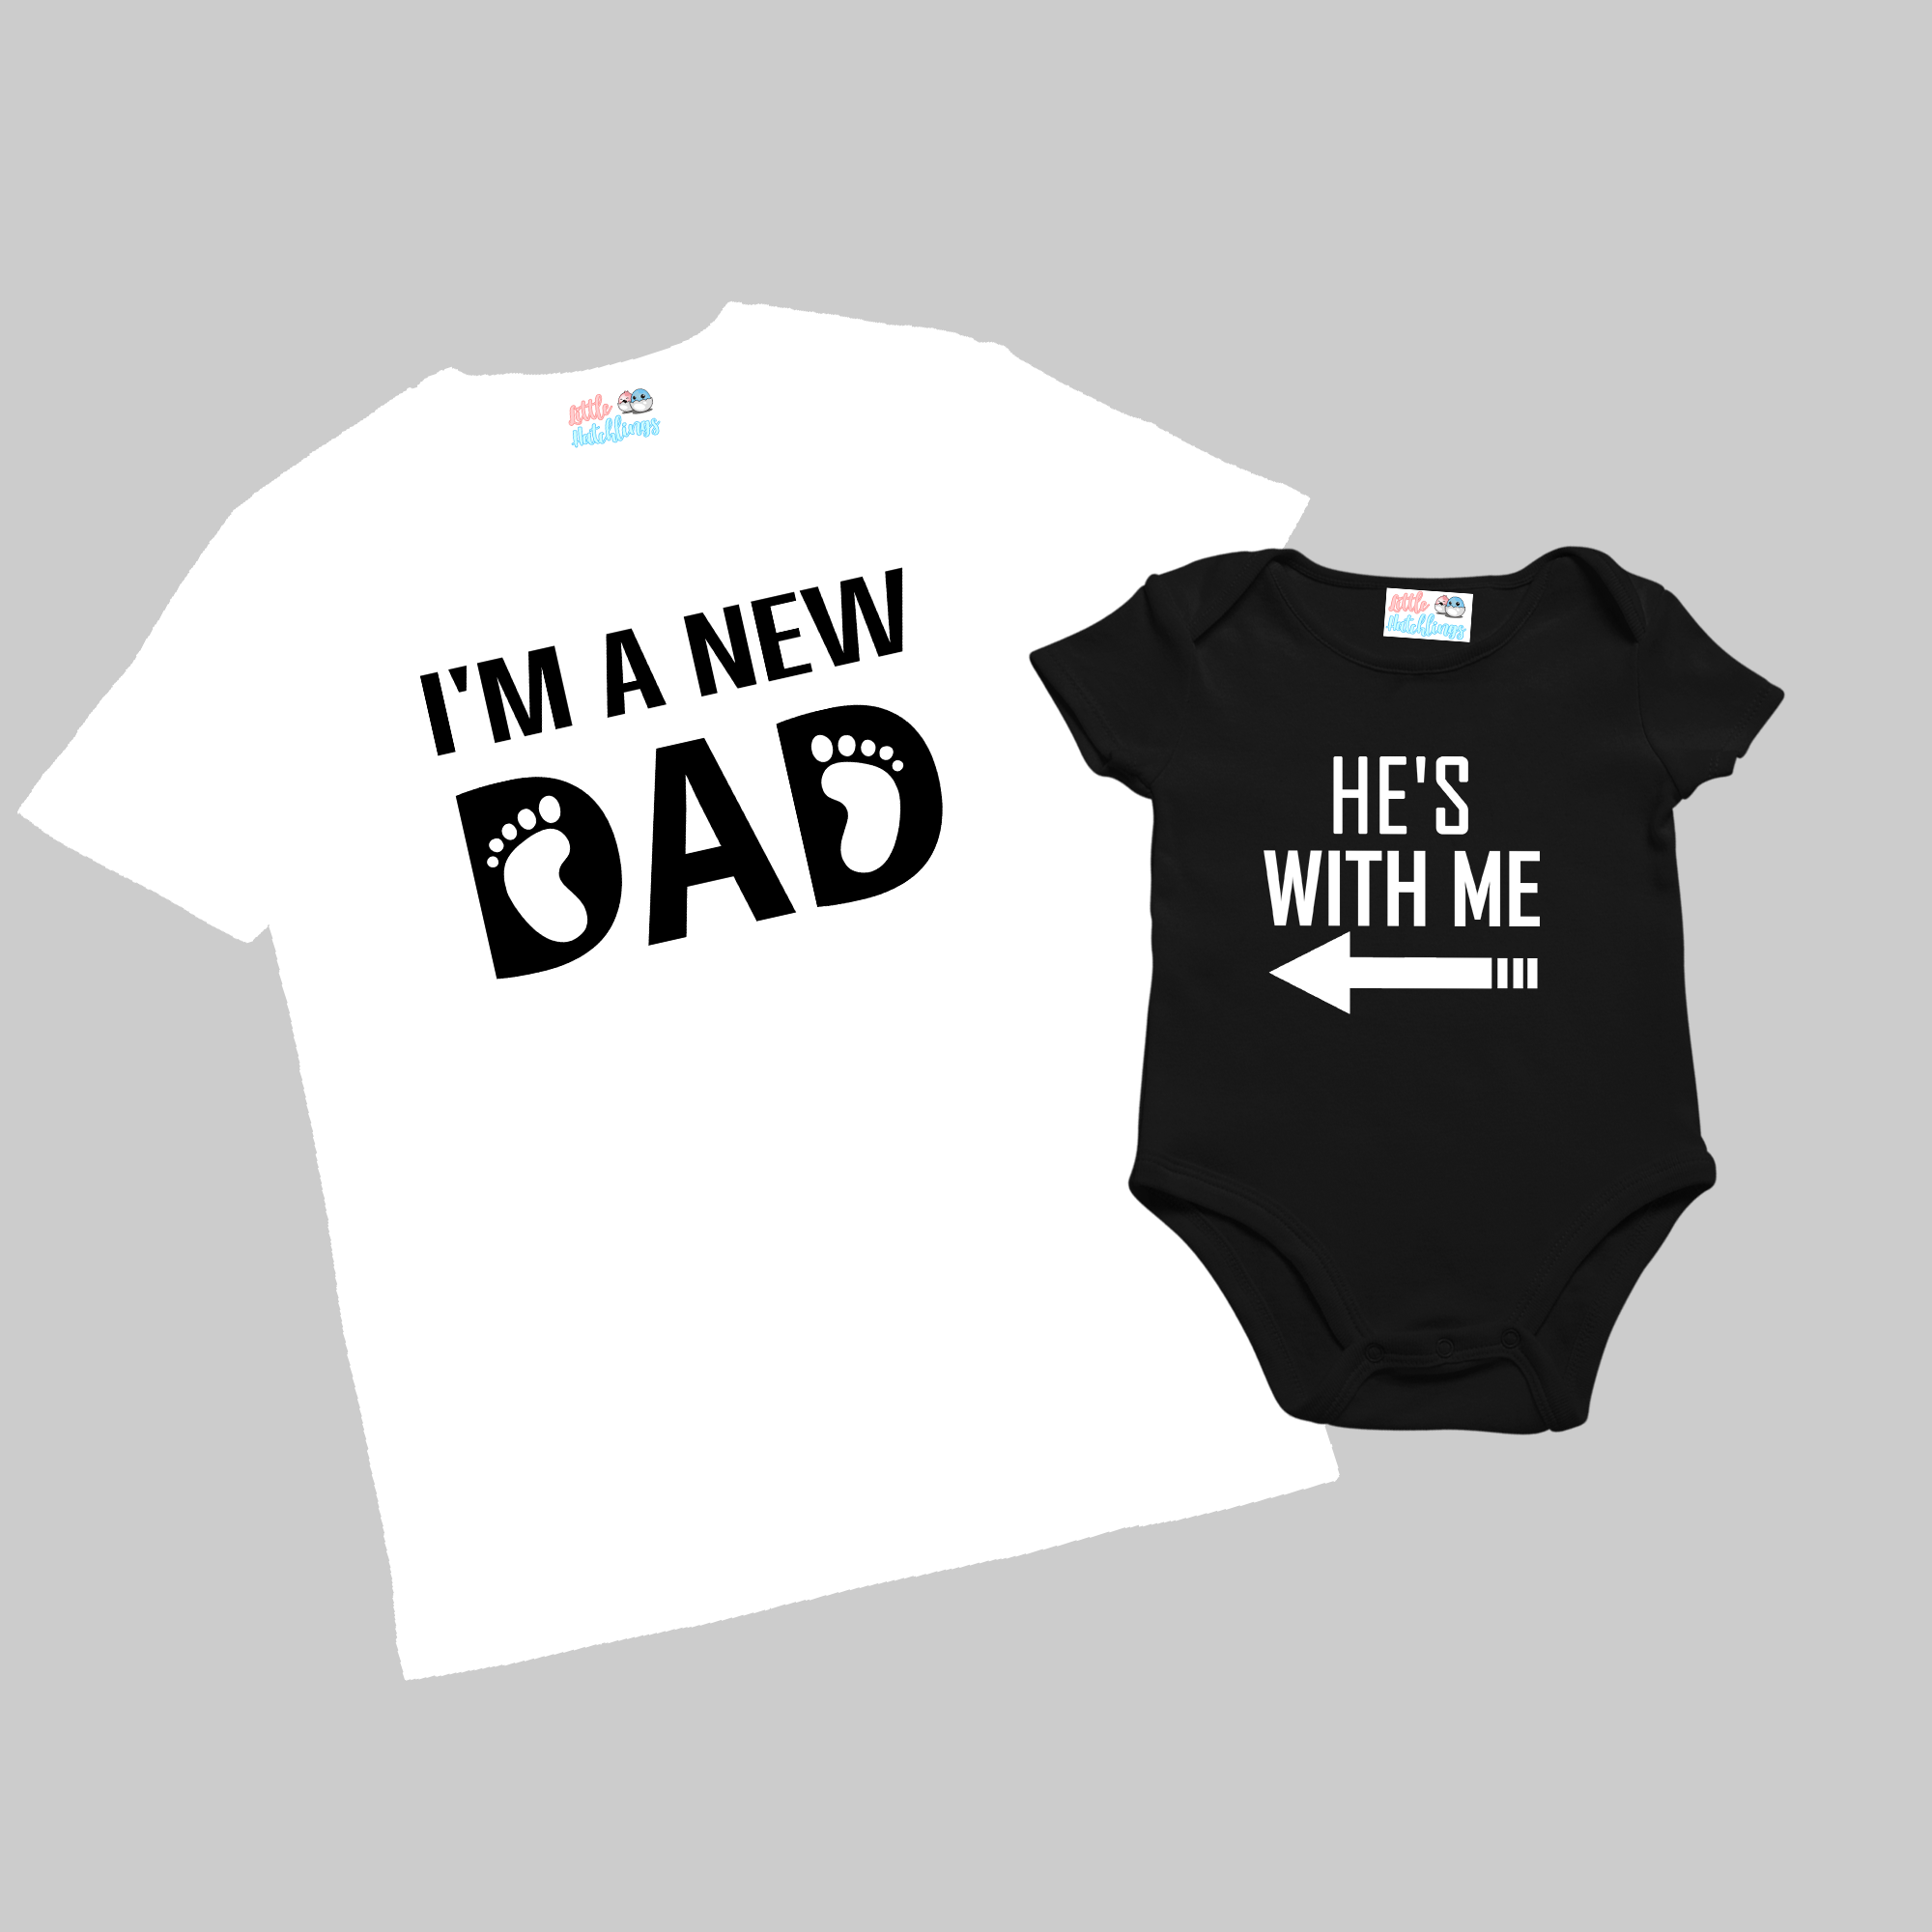 New Dad + He is with Me White and Black Combo - Adult Tshirt + Full Romper